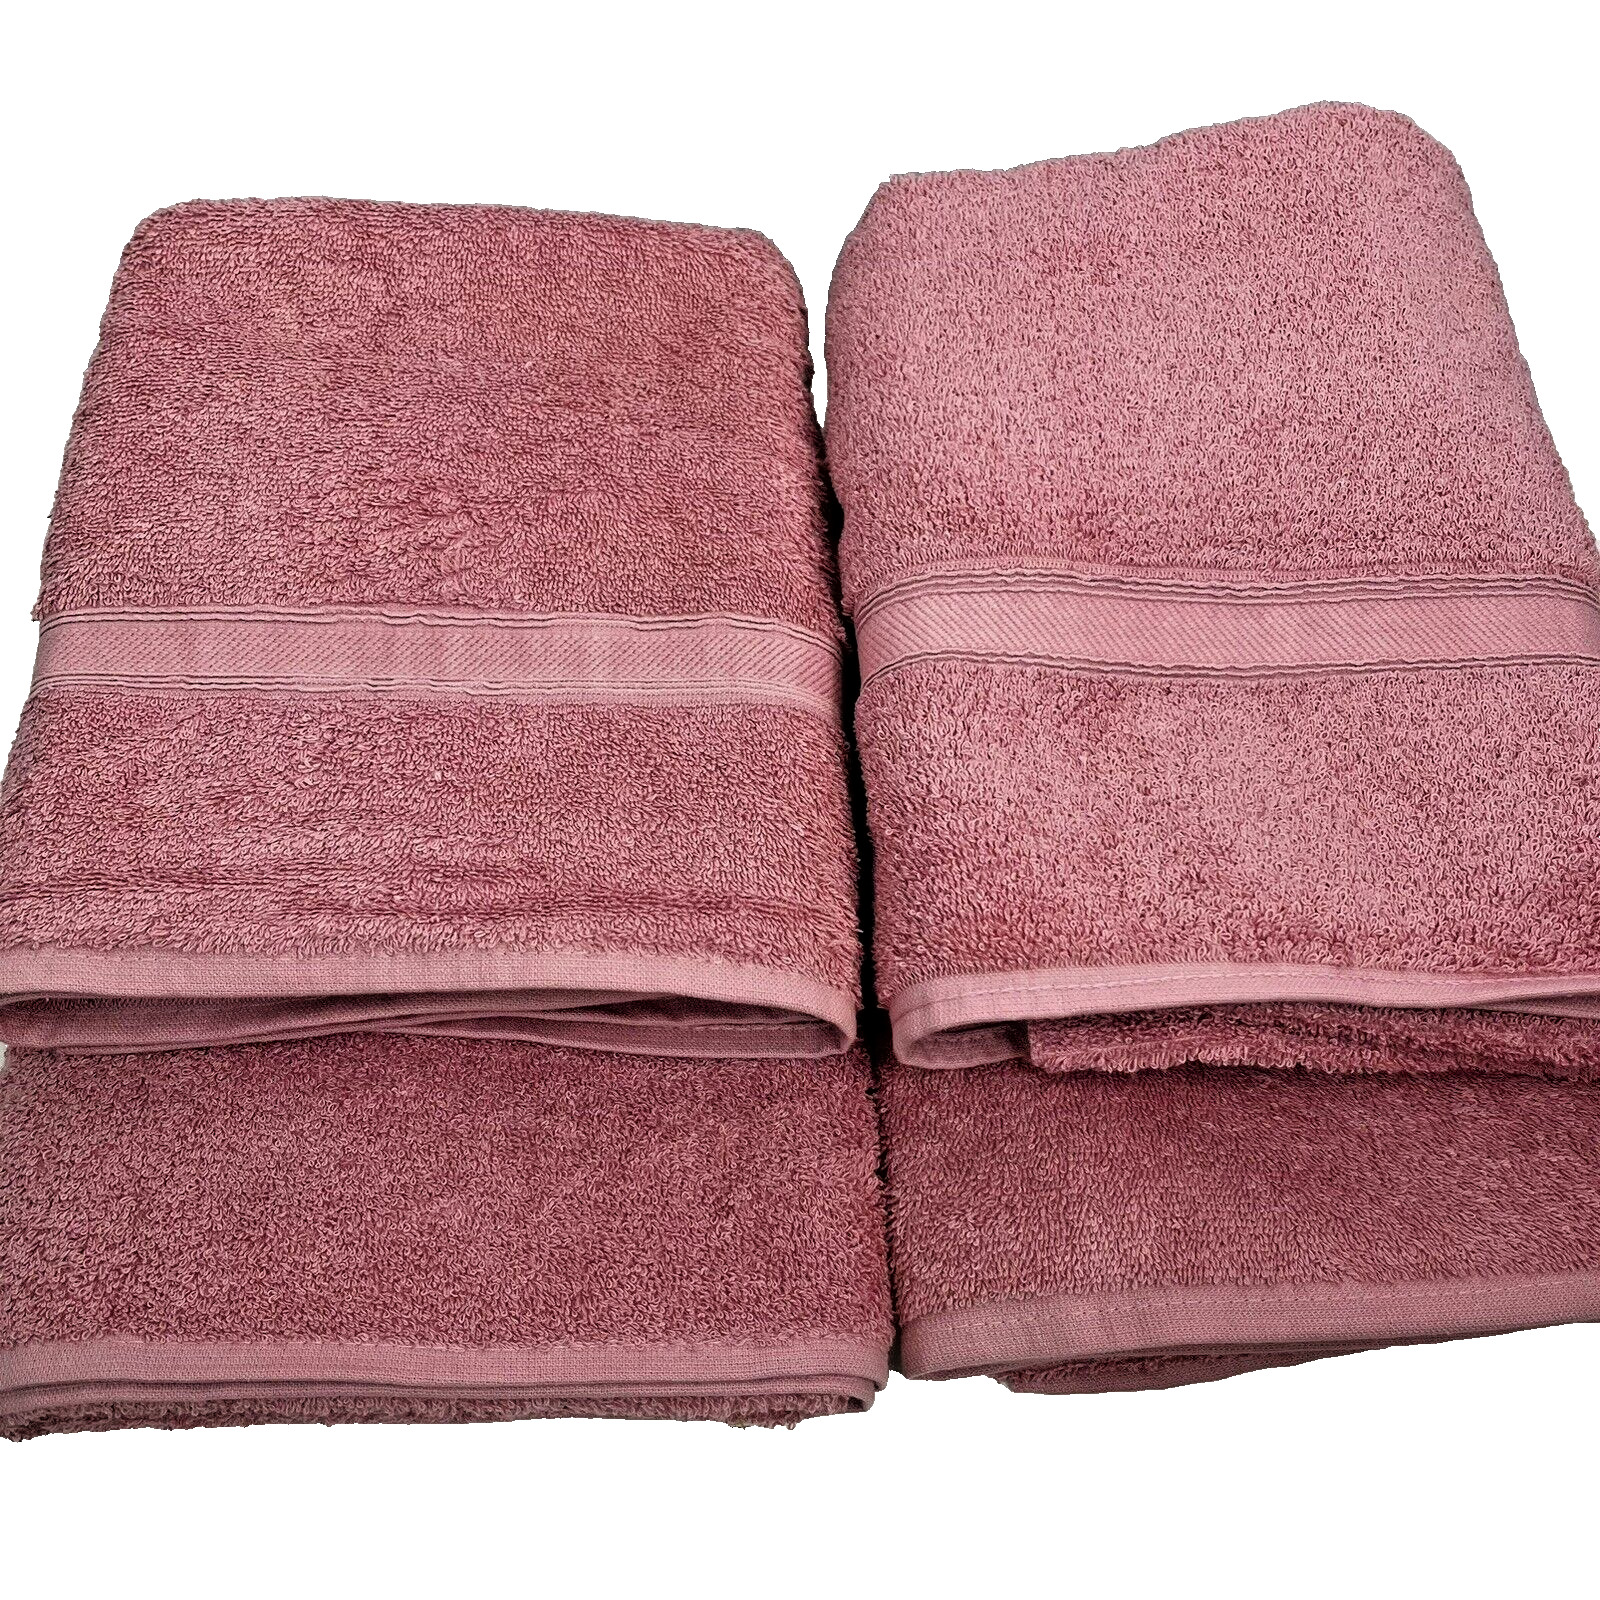 4 CANNON Terry Cloth Dusty Rose Bath Towels 100% Cotton Made USA 80s Vintage